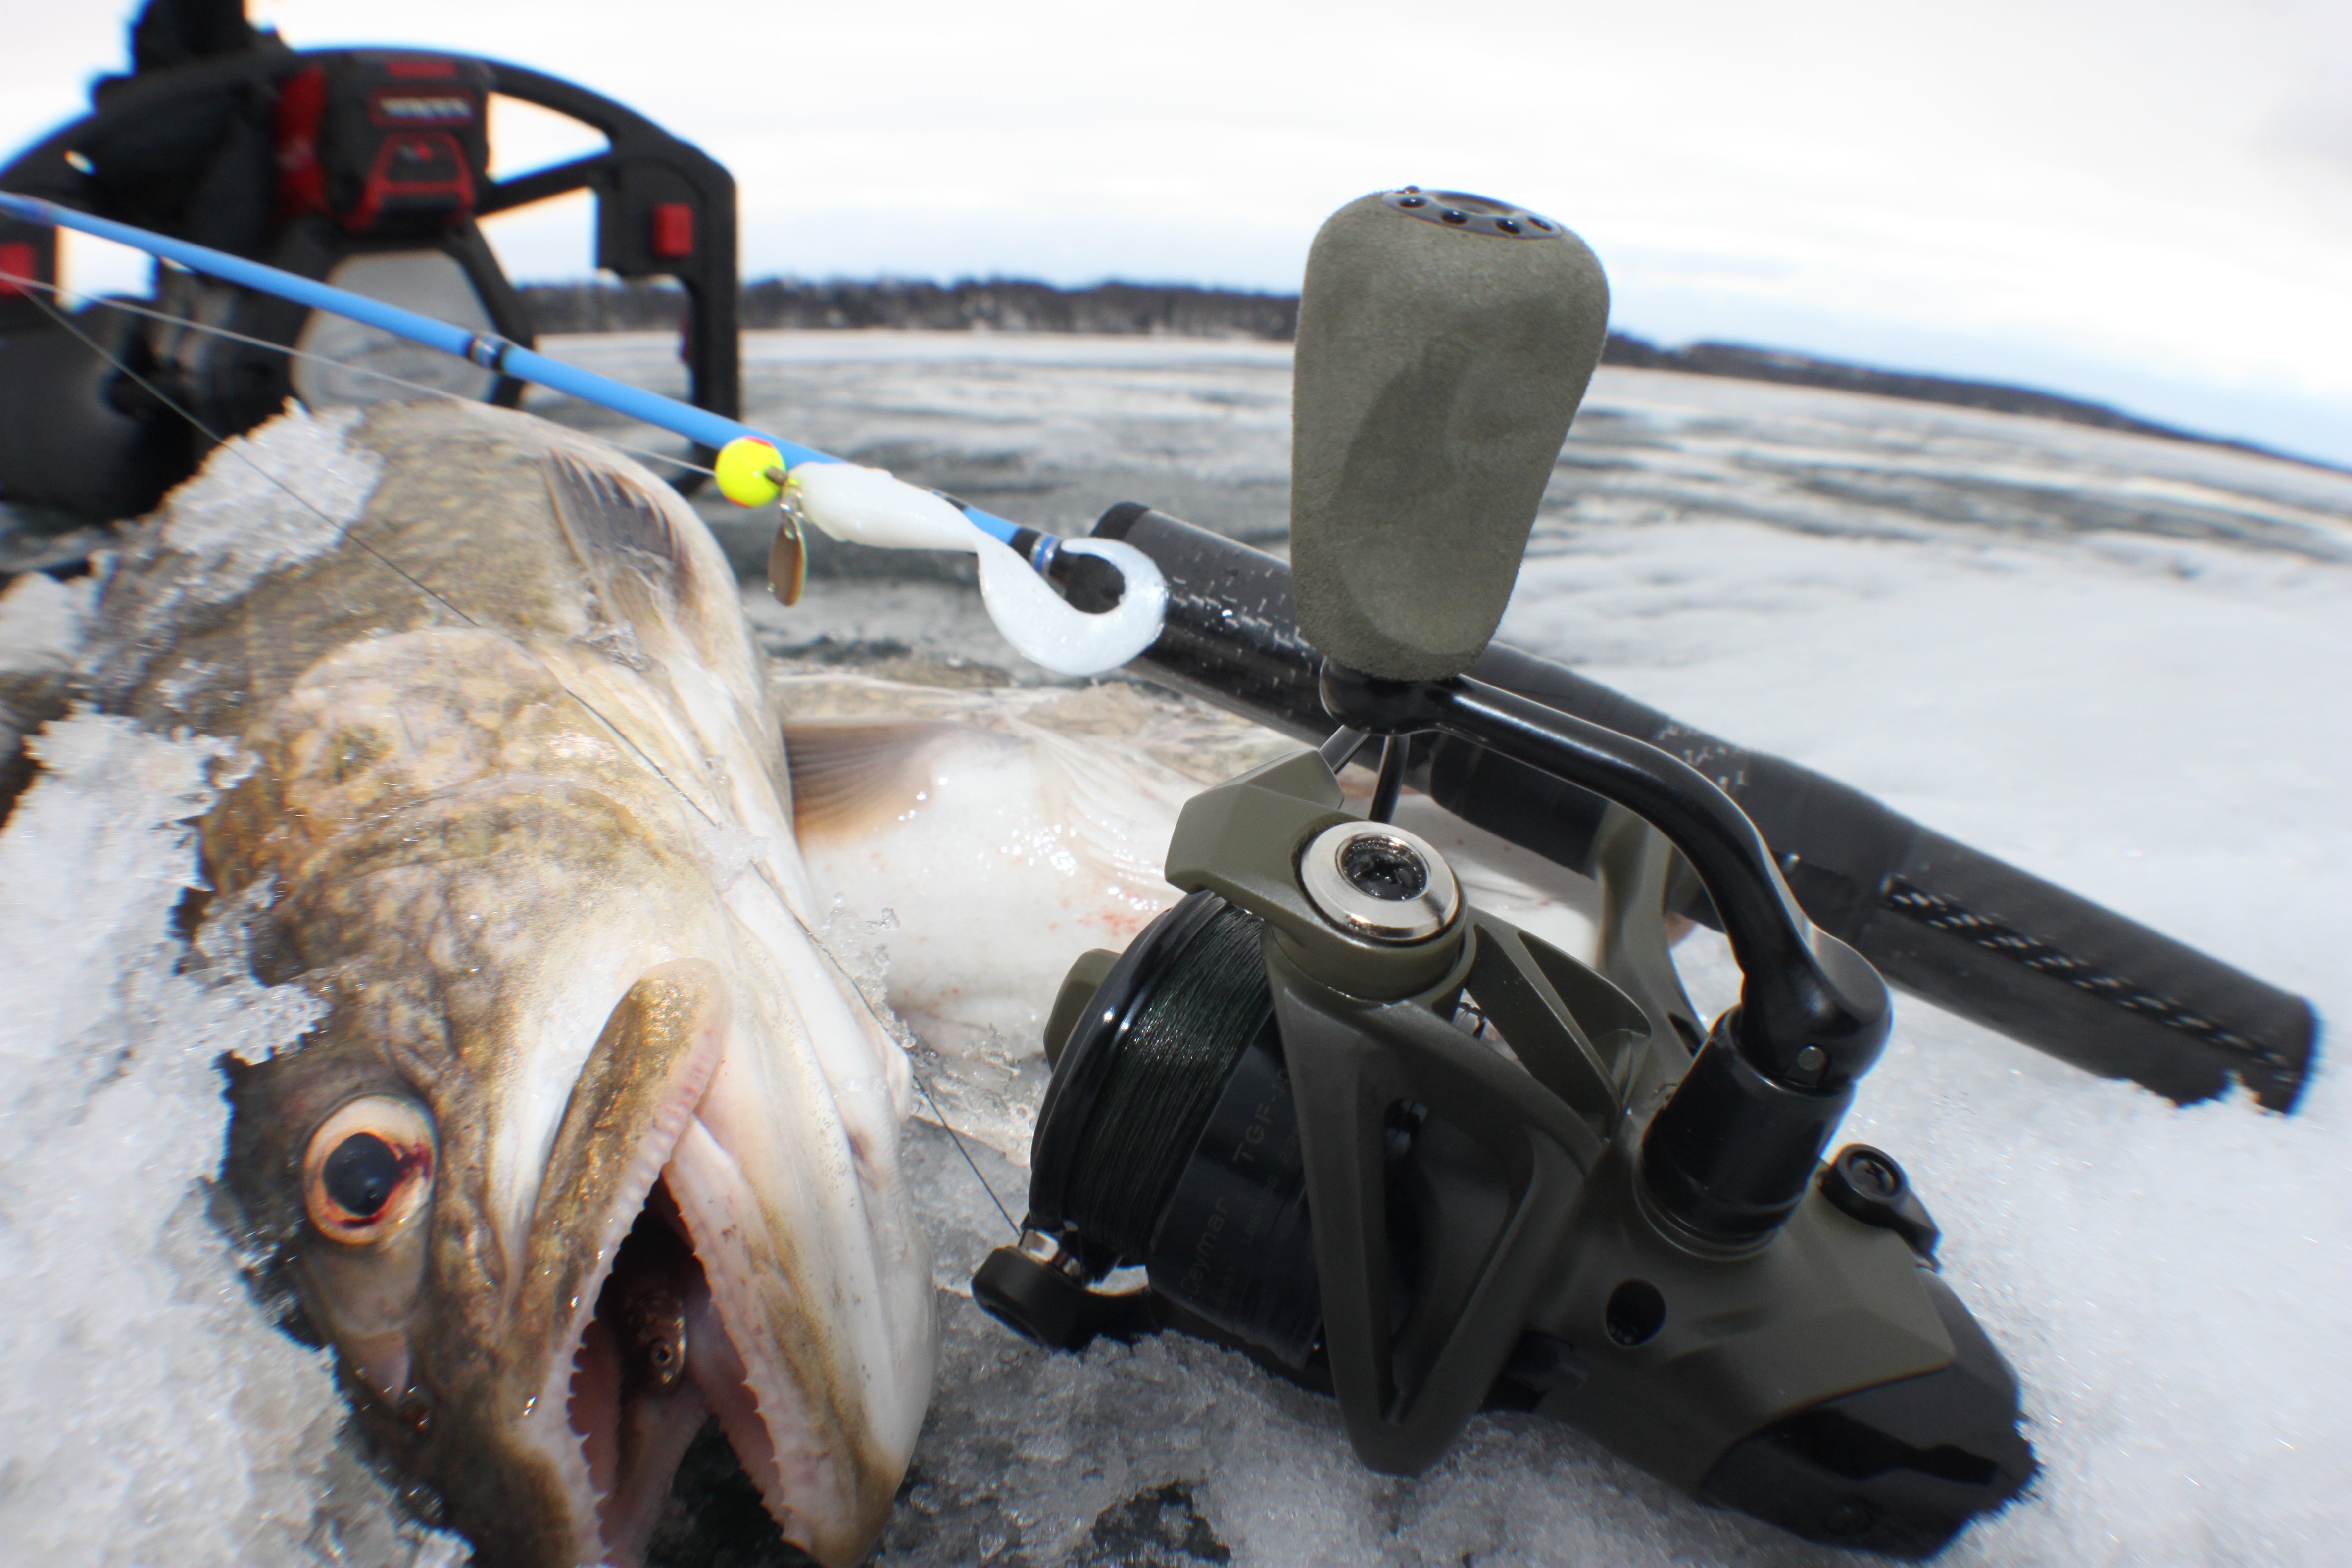 Ice Fishing Safety | Are You Ready for the Hard Water?